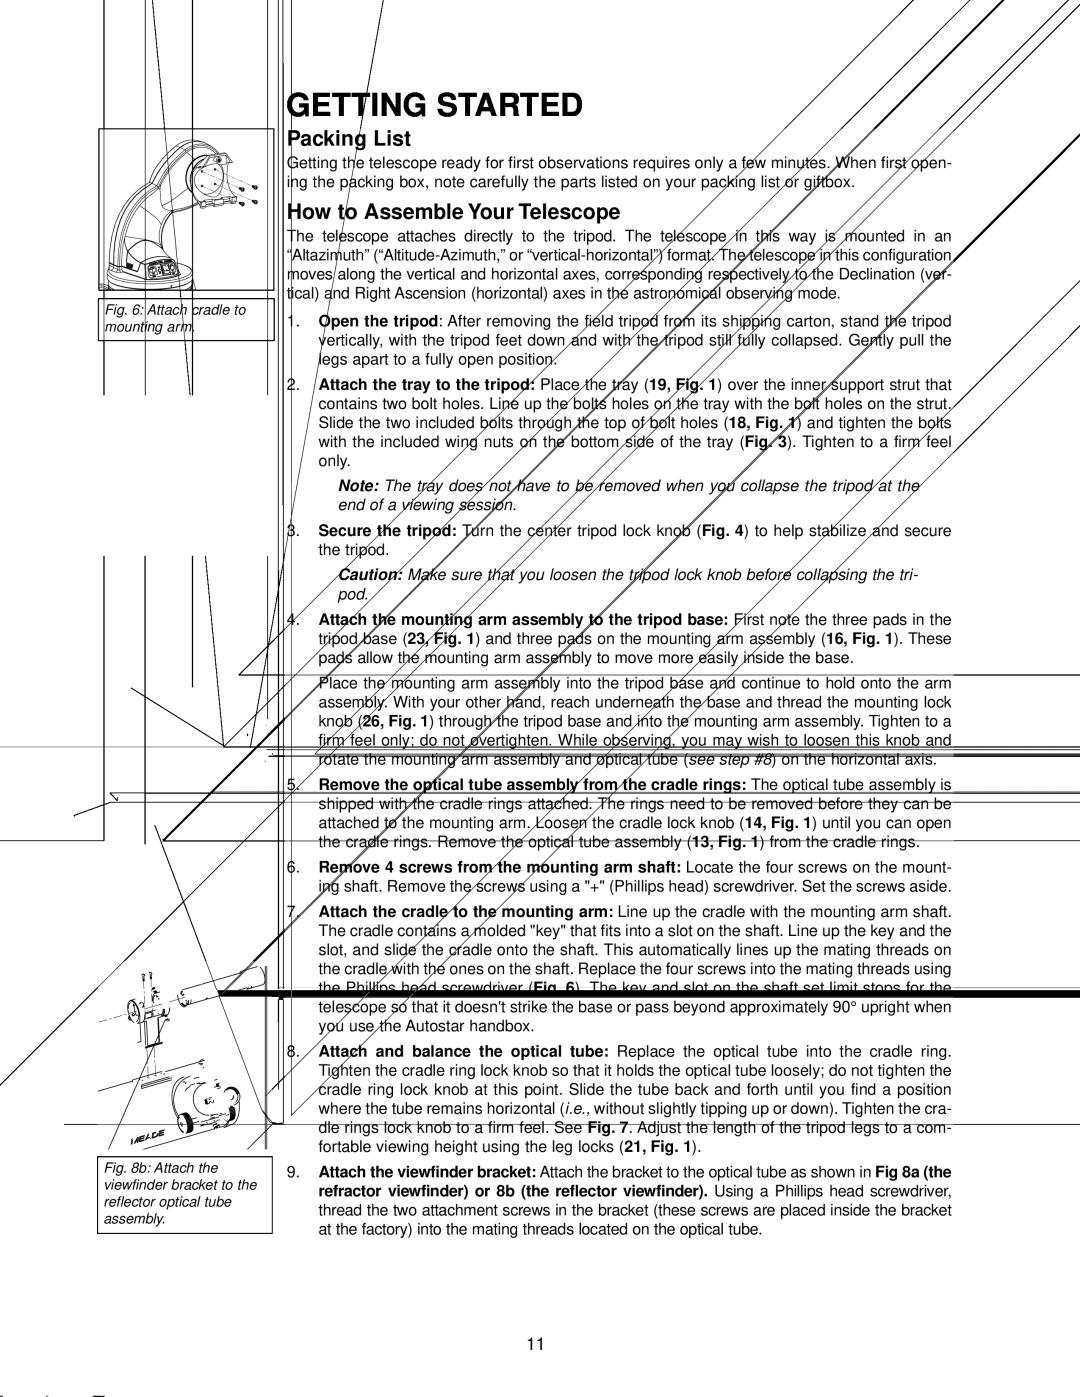 Meade DS-2000 instruction manual Getting Started, Packing List, How to Assemble Your Telescope 